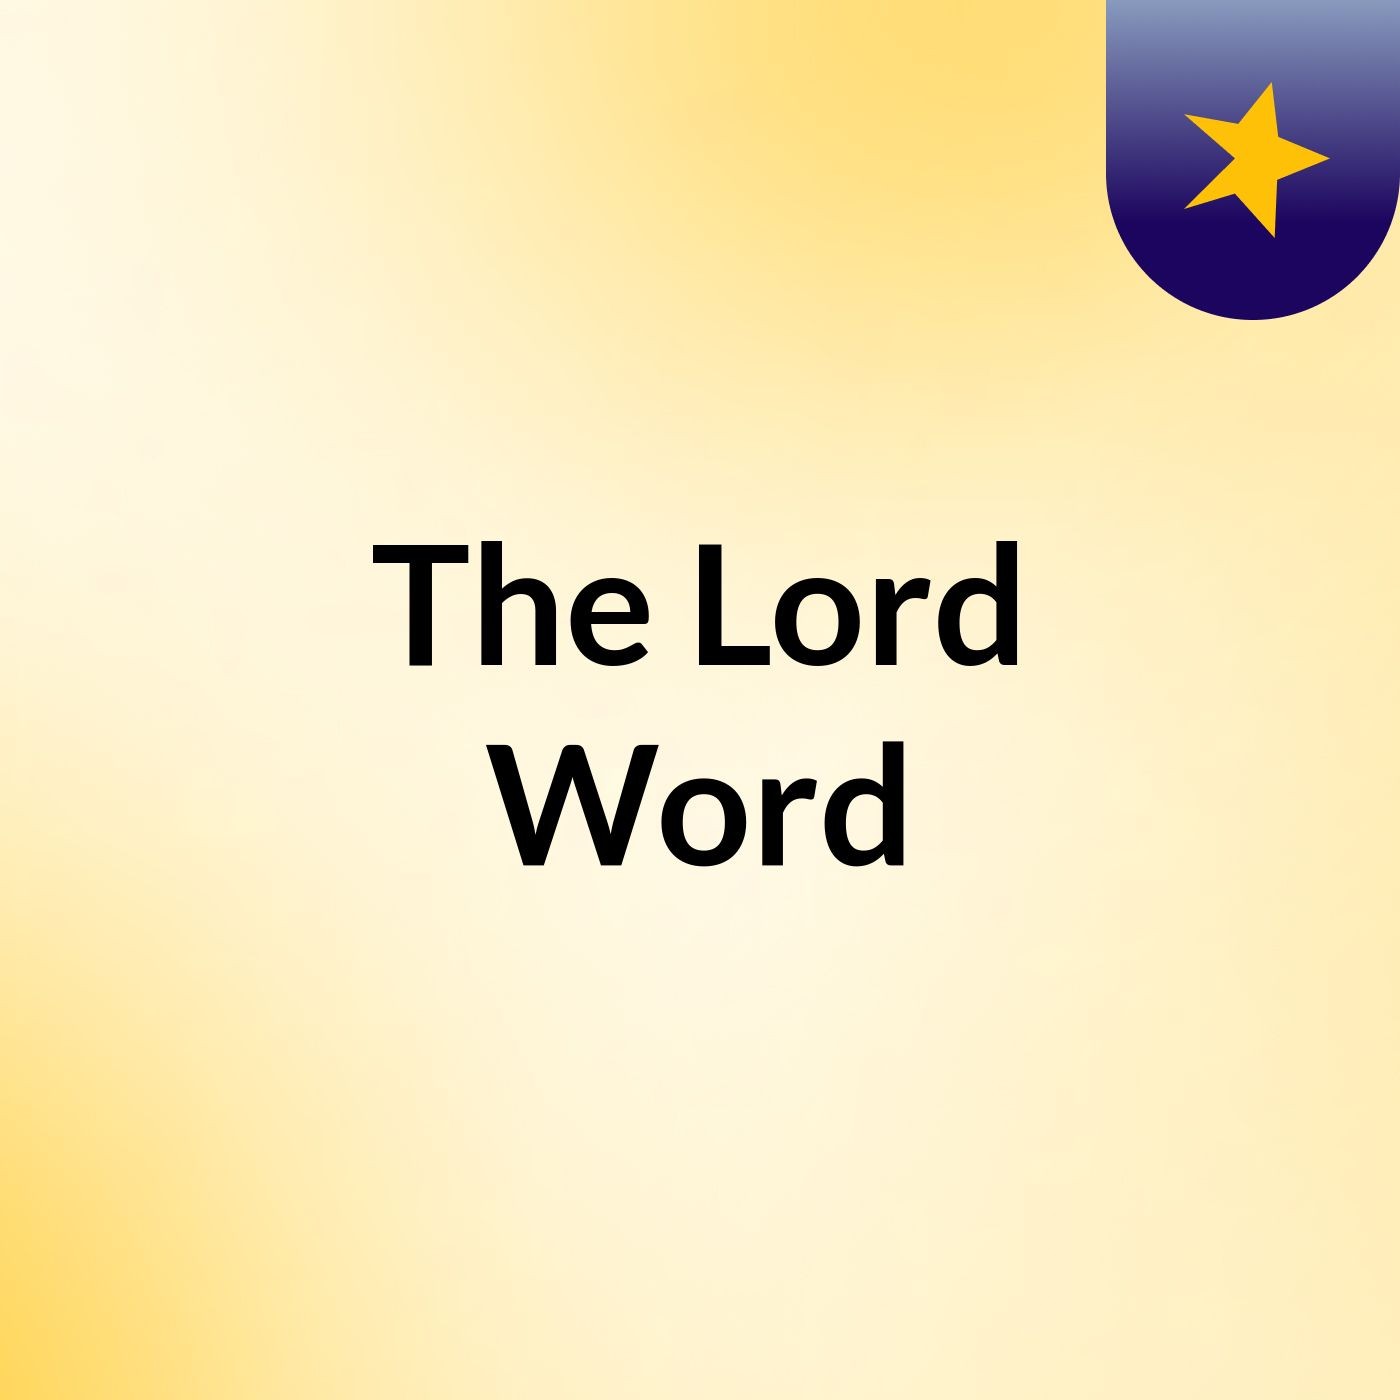 The Lord Word